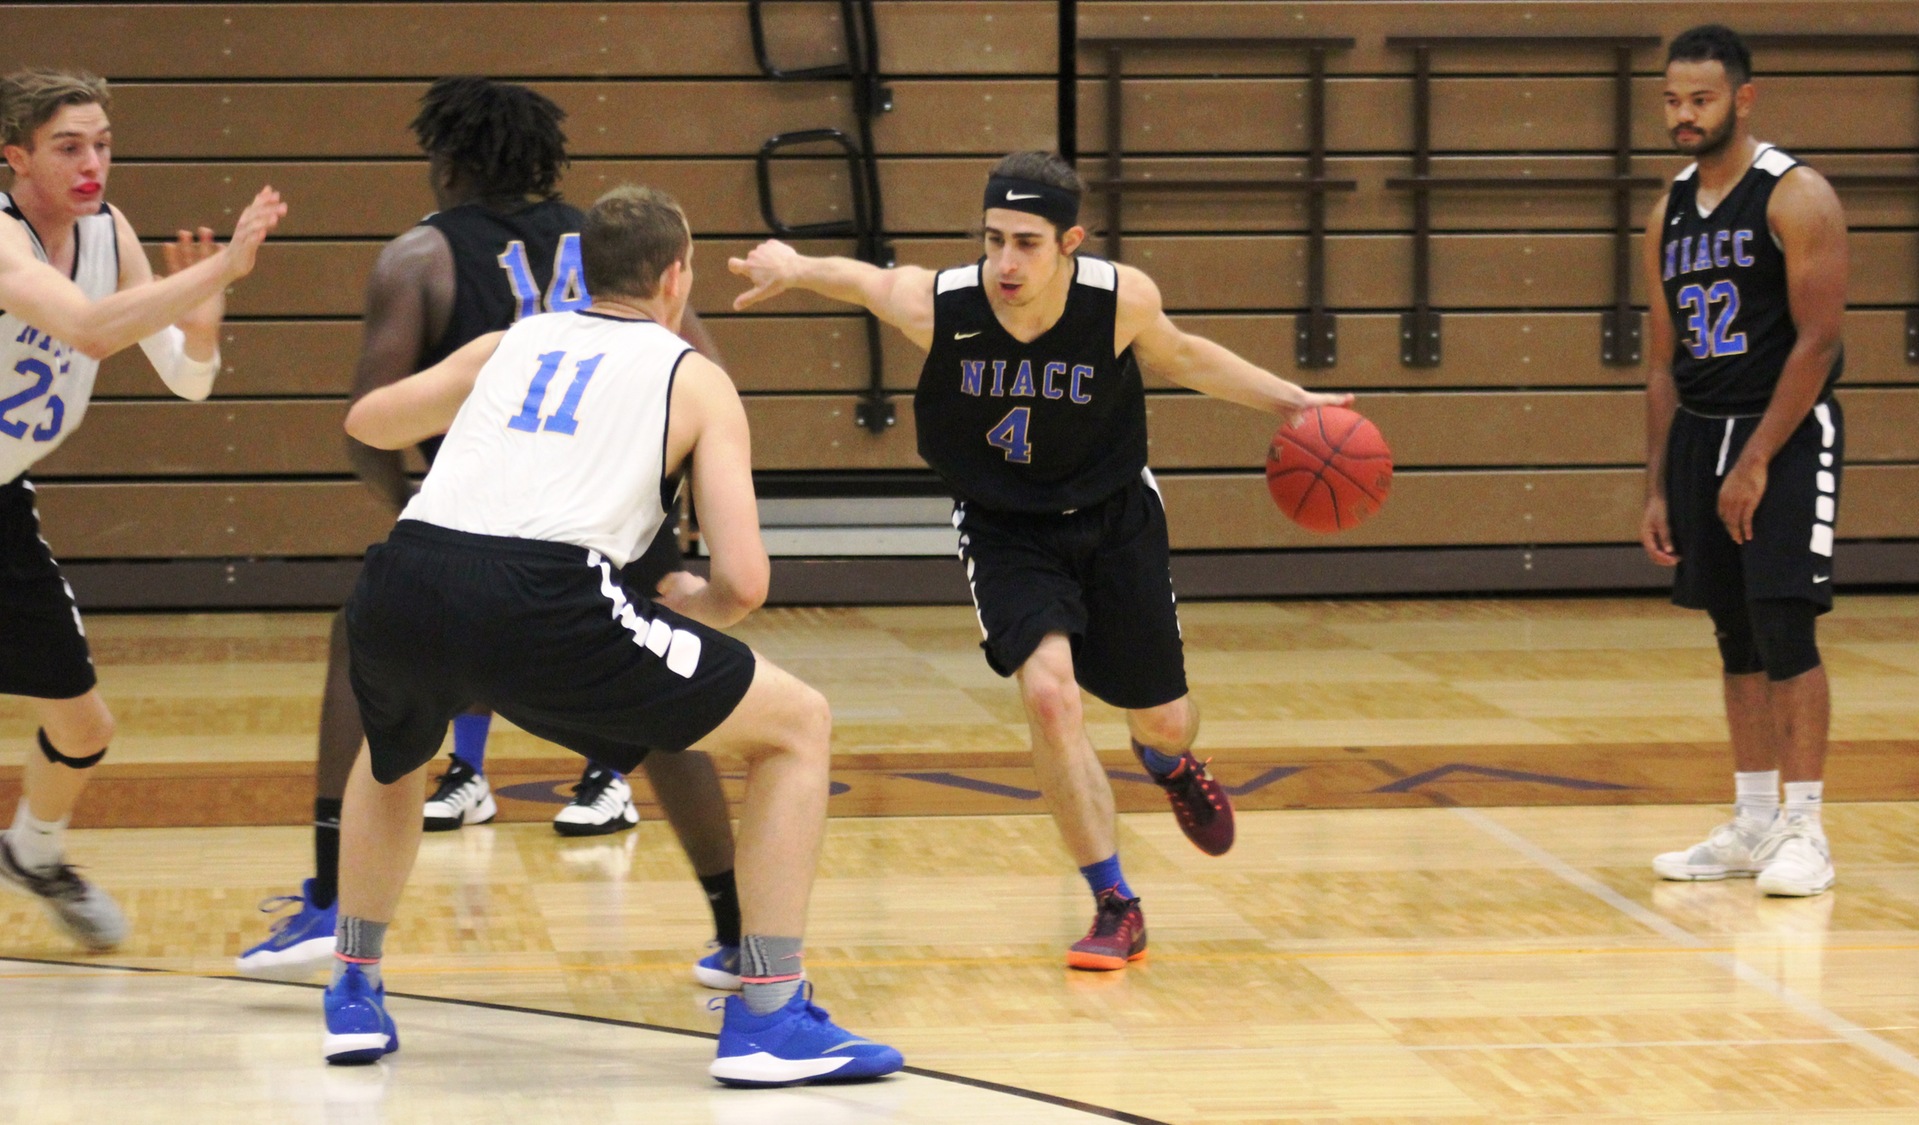 Nick Wurm (4) drives to the basket during a recent practice.